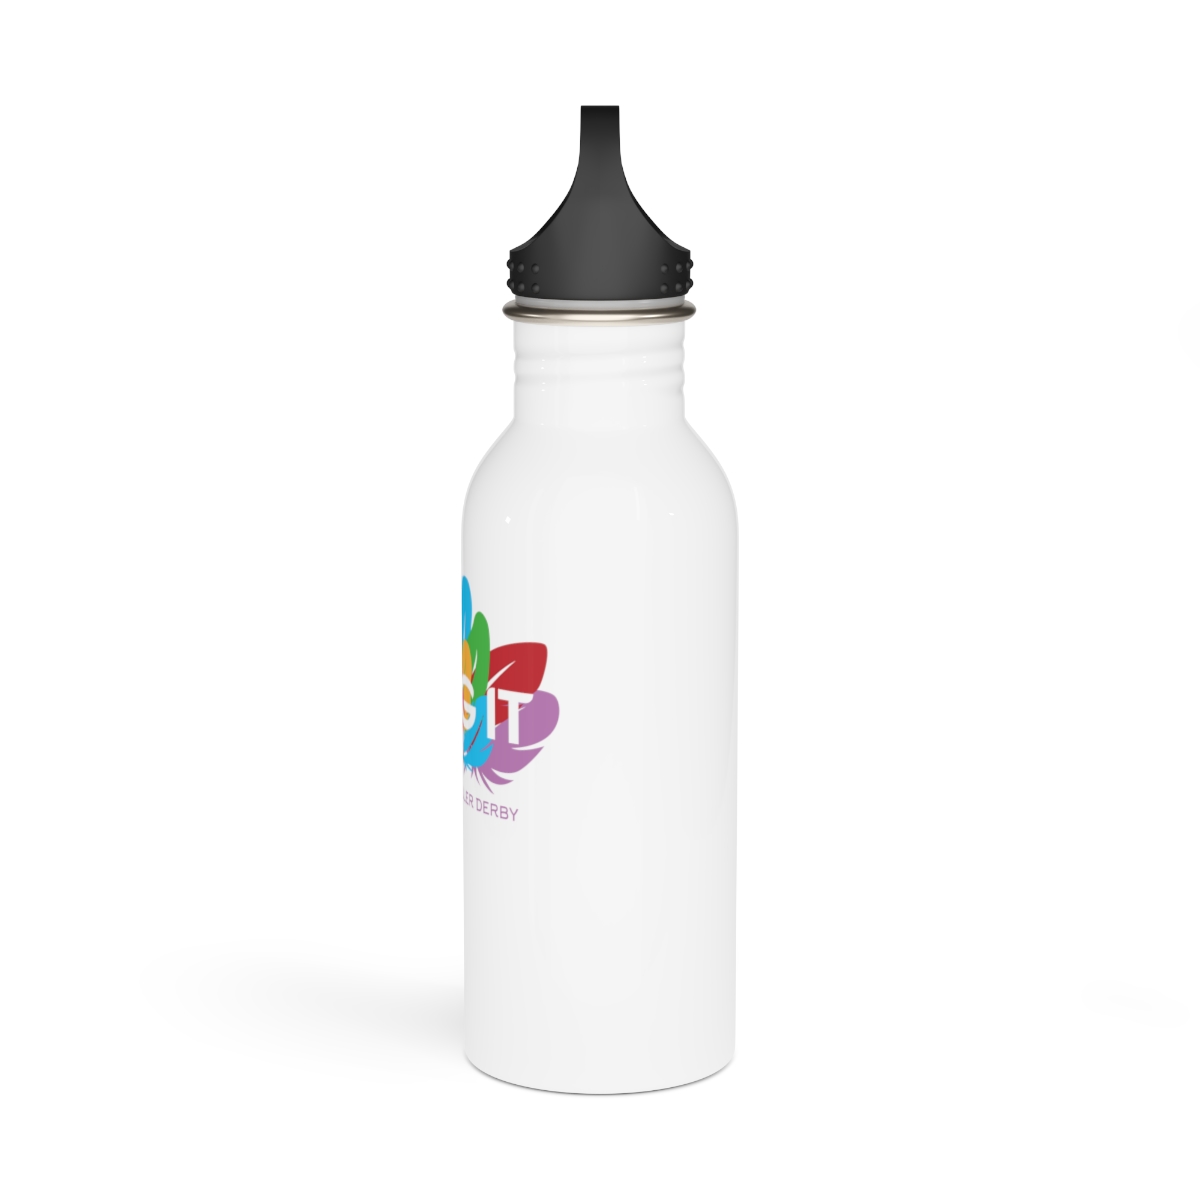 WING IT Stainless Steel Water Bottle product thumbnail image